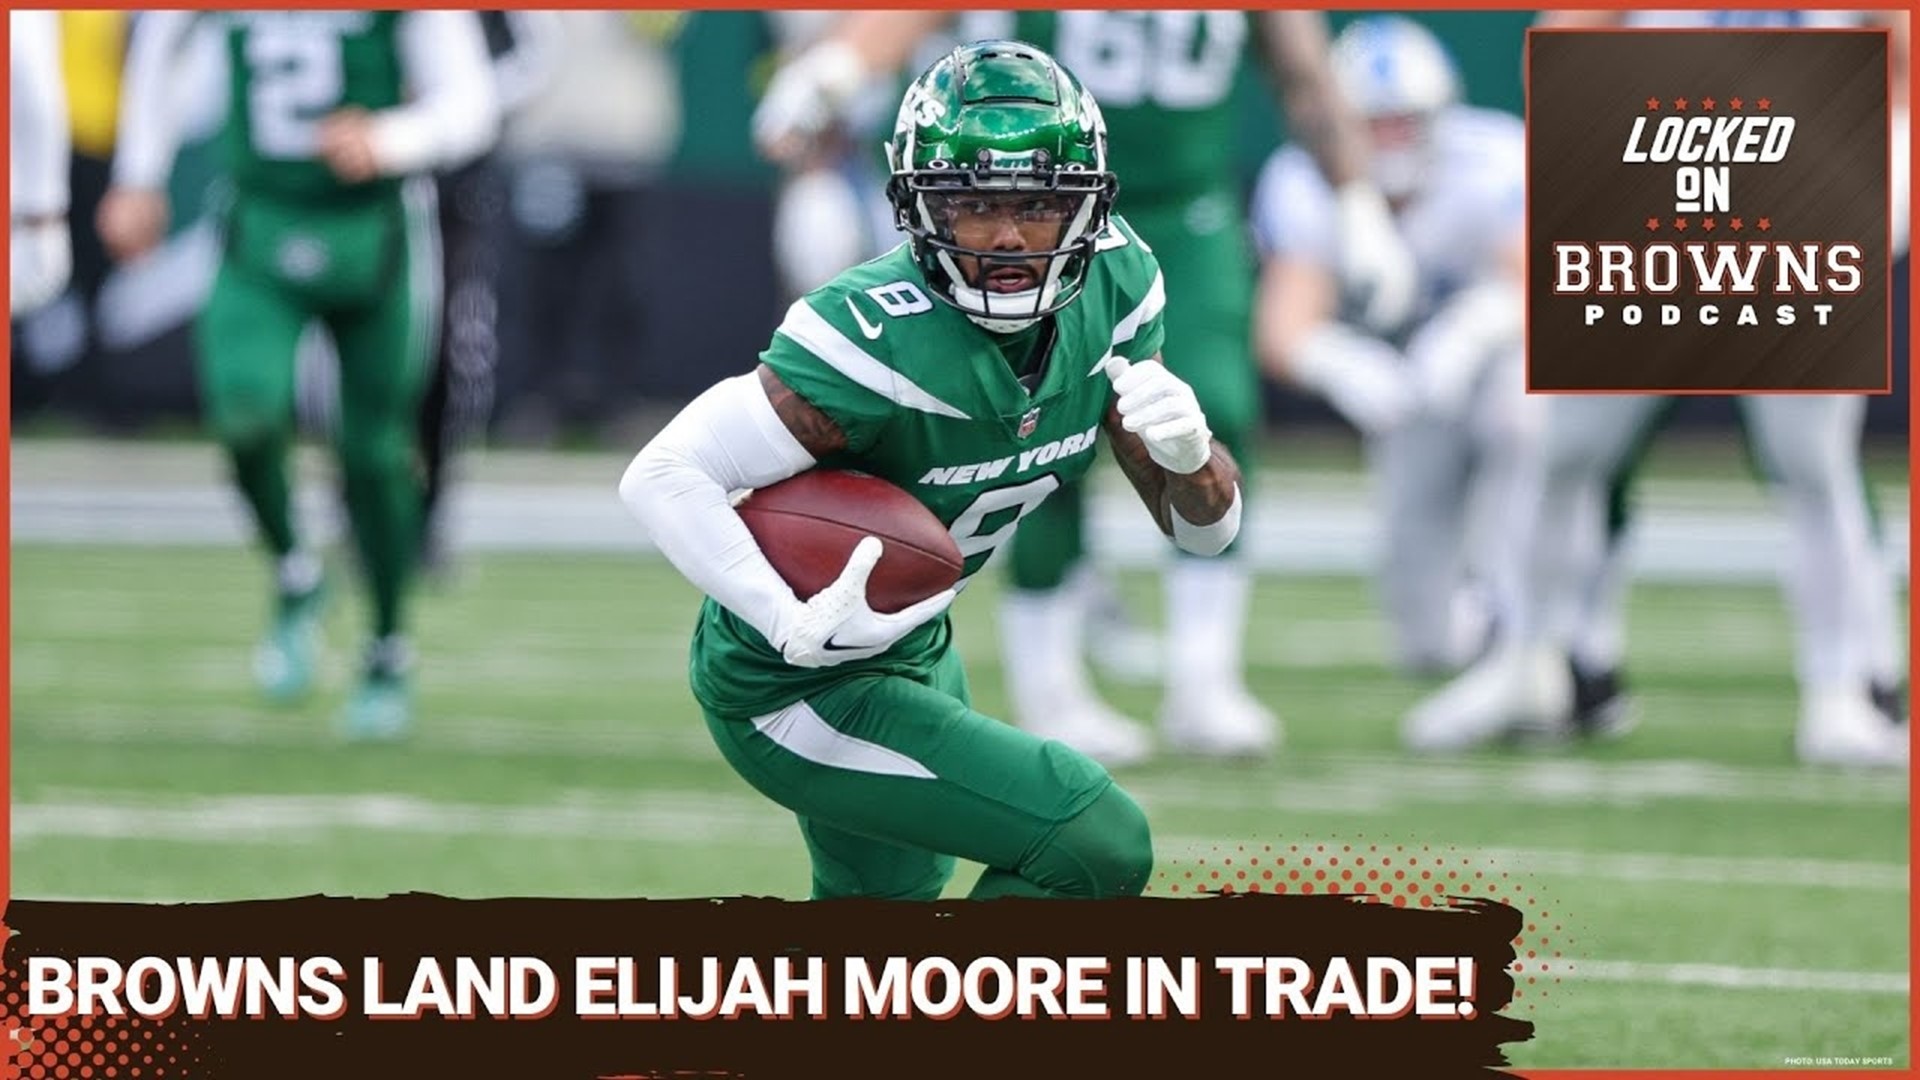 The Cleveland Browns have acquired wide receiver Elijah Moore from the New York Jets! The Browns have landed their next big addition to their offense.